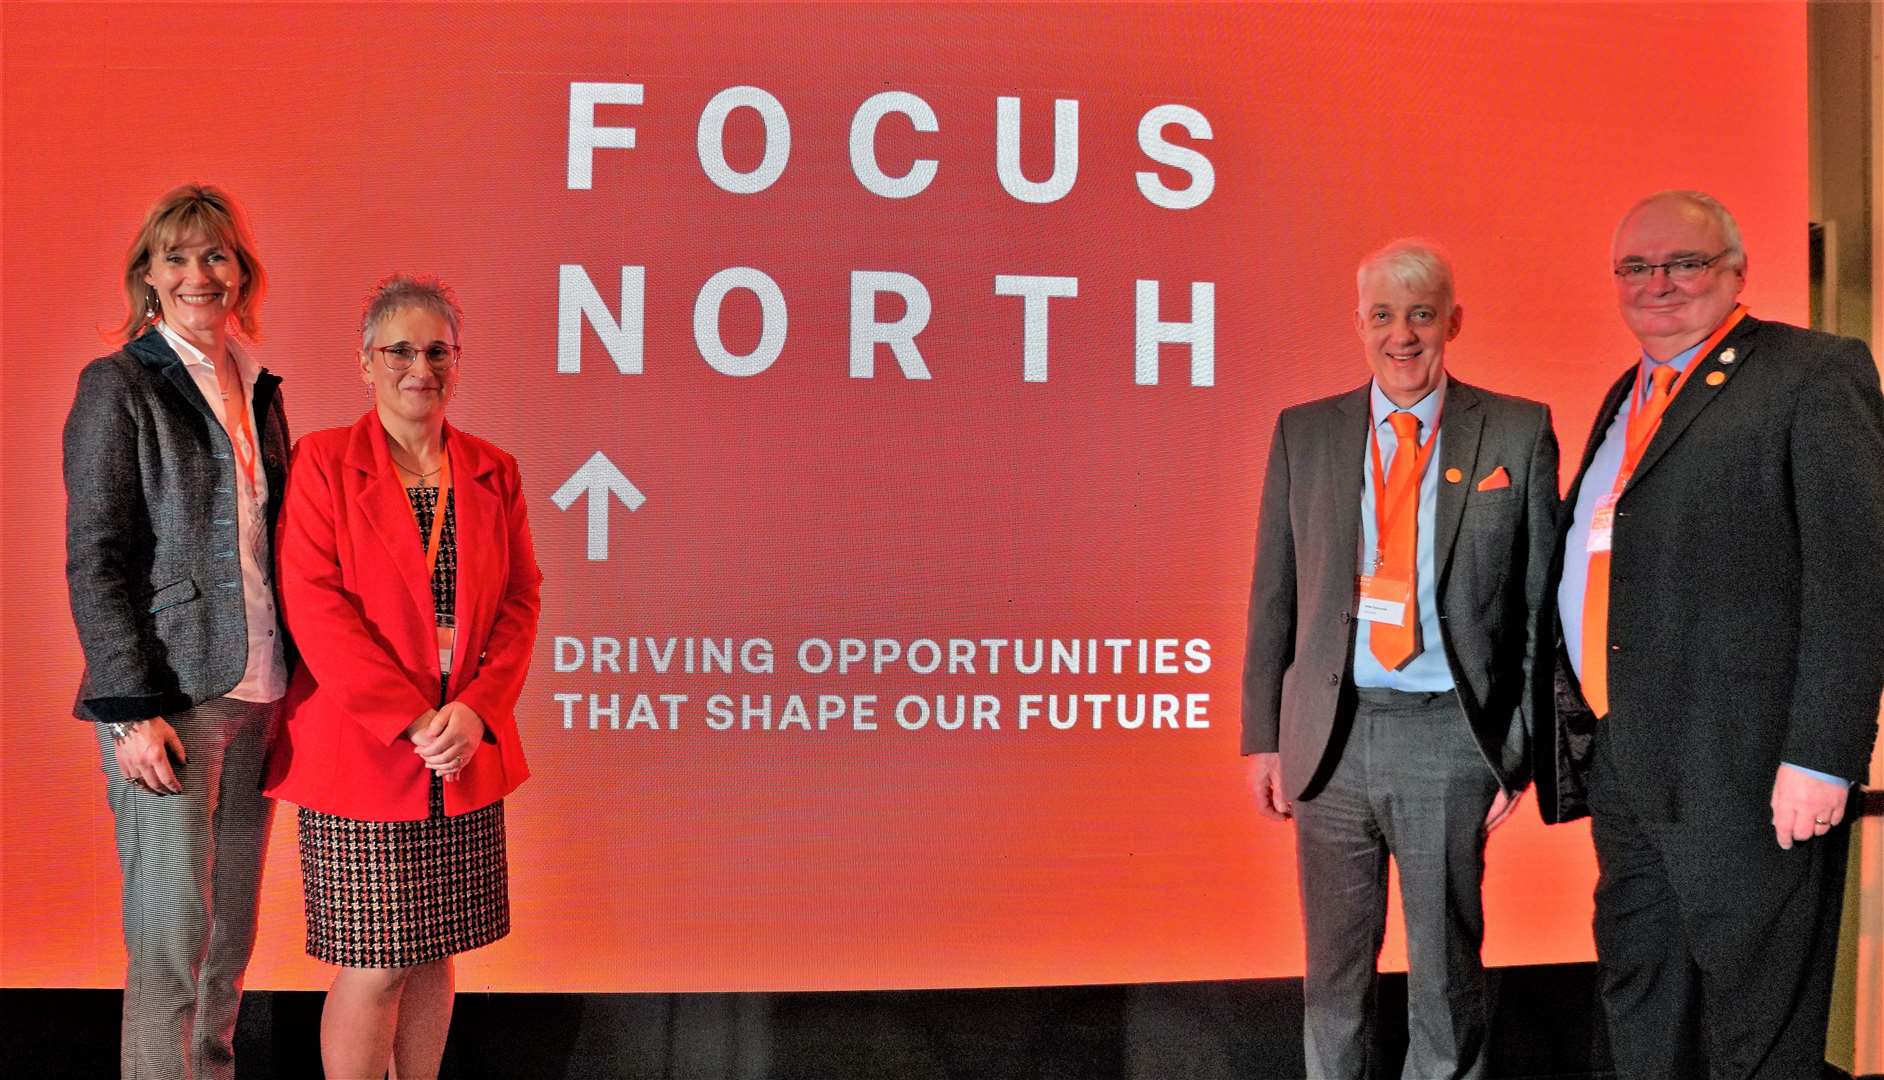 Presenter Nicky Marr, on the left, with Trudy Morris (chief executive of Caithness Chamber of Commerce), Peter Faccenda (Focus North programme manager) and, on the right, Simon Middlemas (Focus North chairman). Picture: DGS